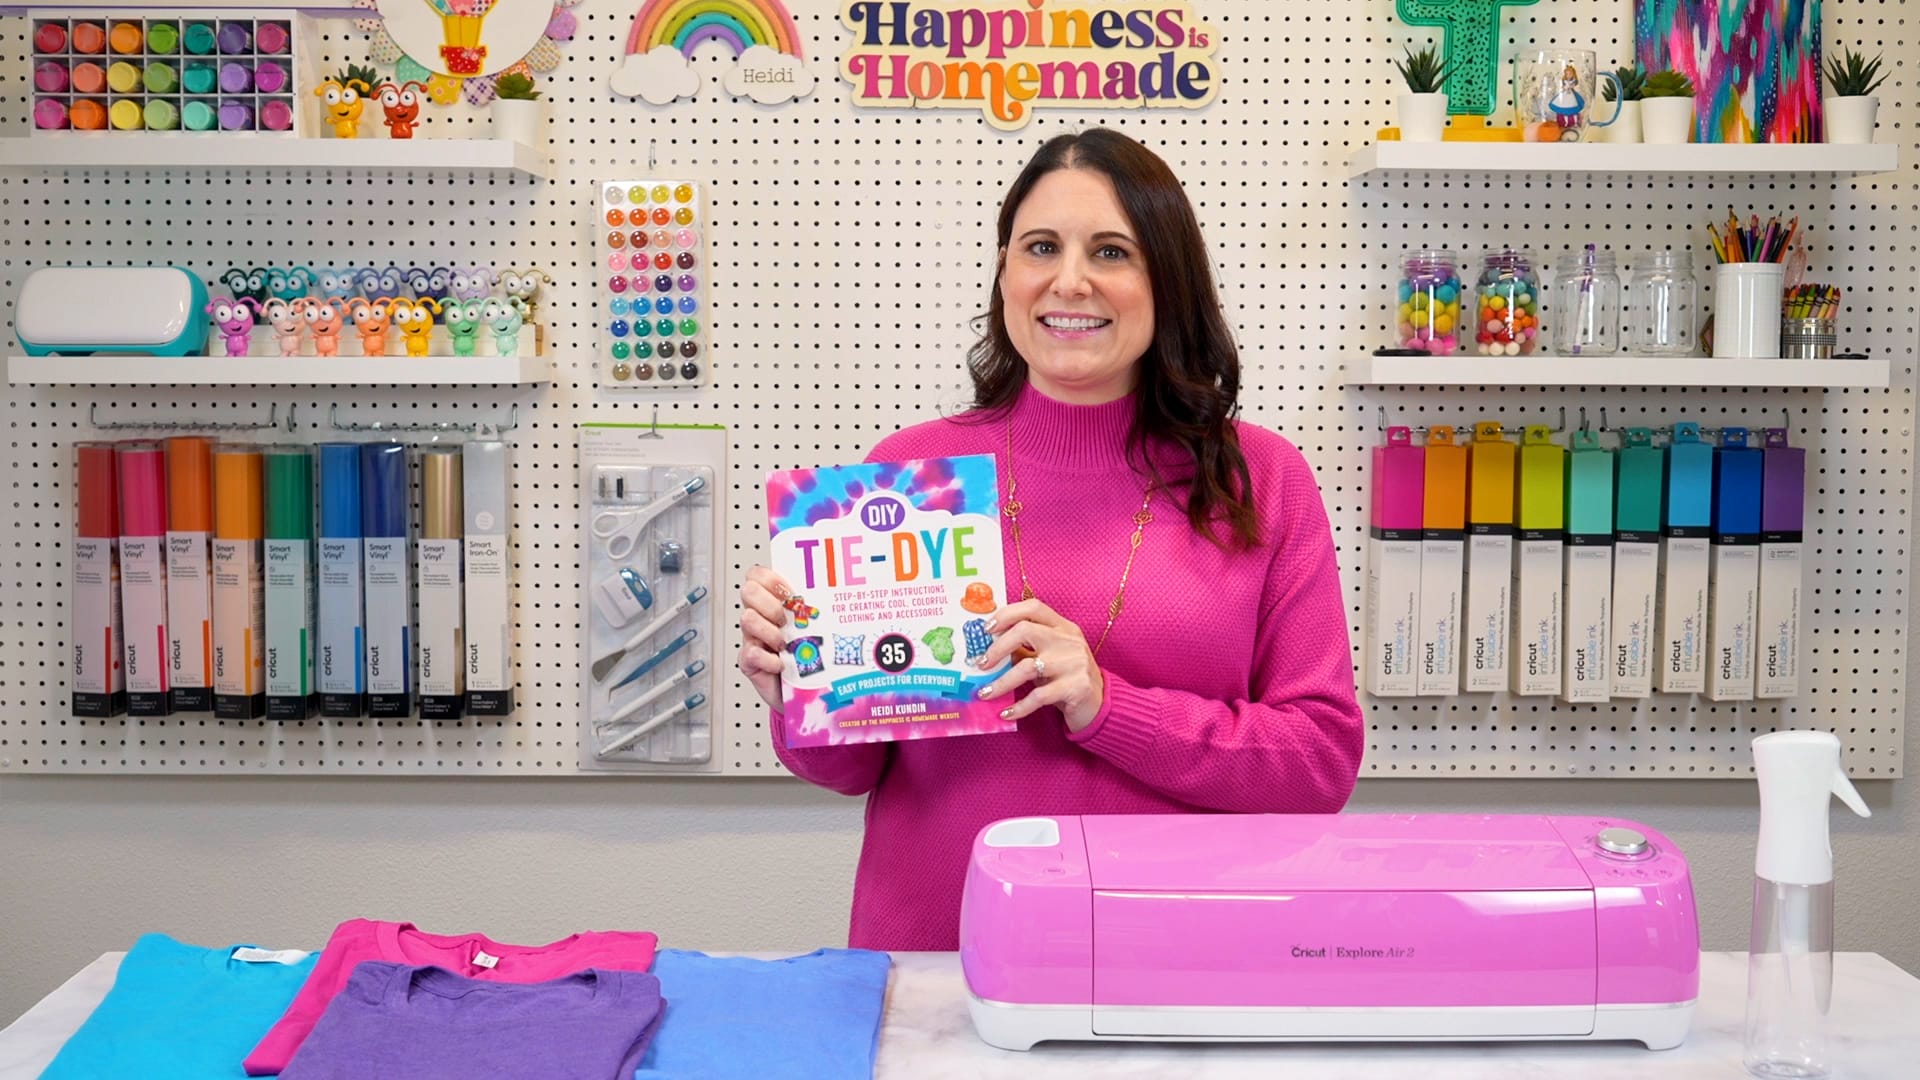 Dark haired white woman holding up "DIY Tie-Dye" book in front of a colorful pegboard wall of craft supplies